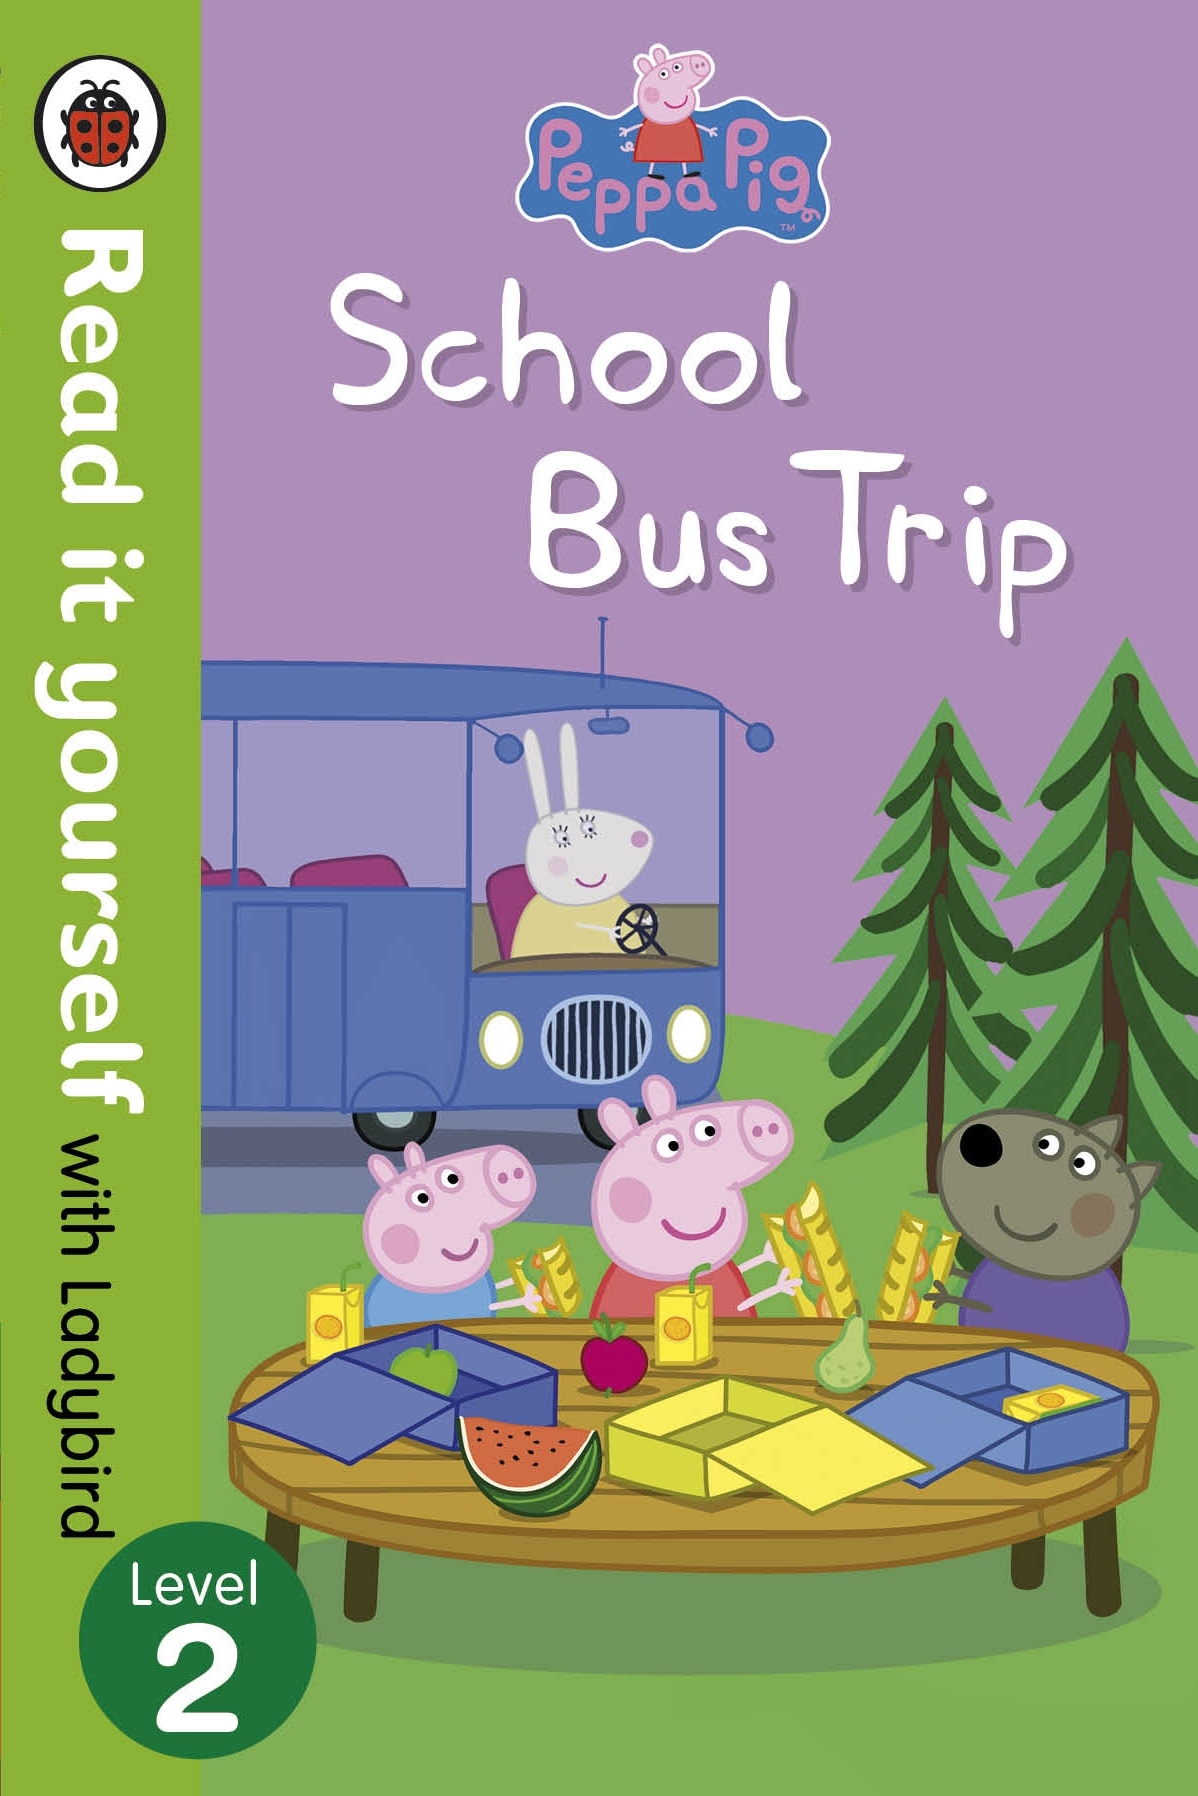 Book “Peppa Pig: School Bus Trip - Read it yourself with Ladybird” by Ladybird, Peppa Pig — July 3, 2014